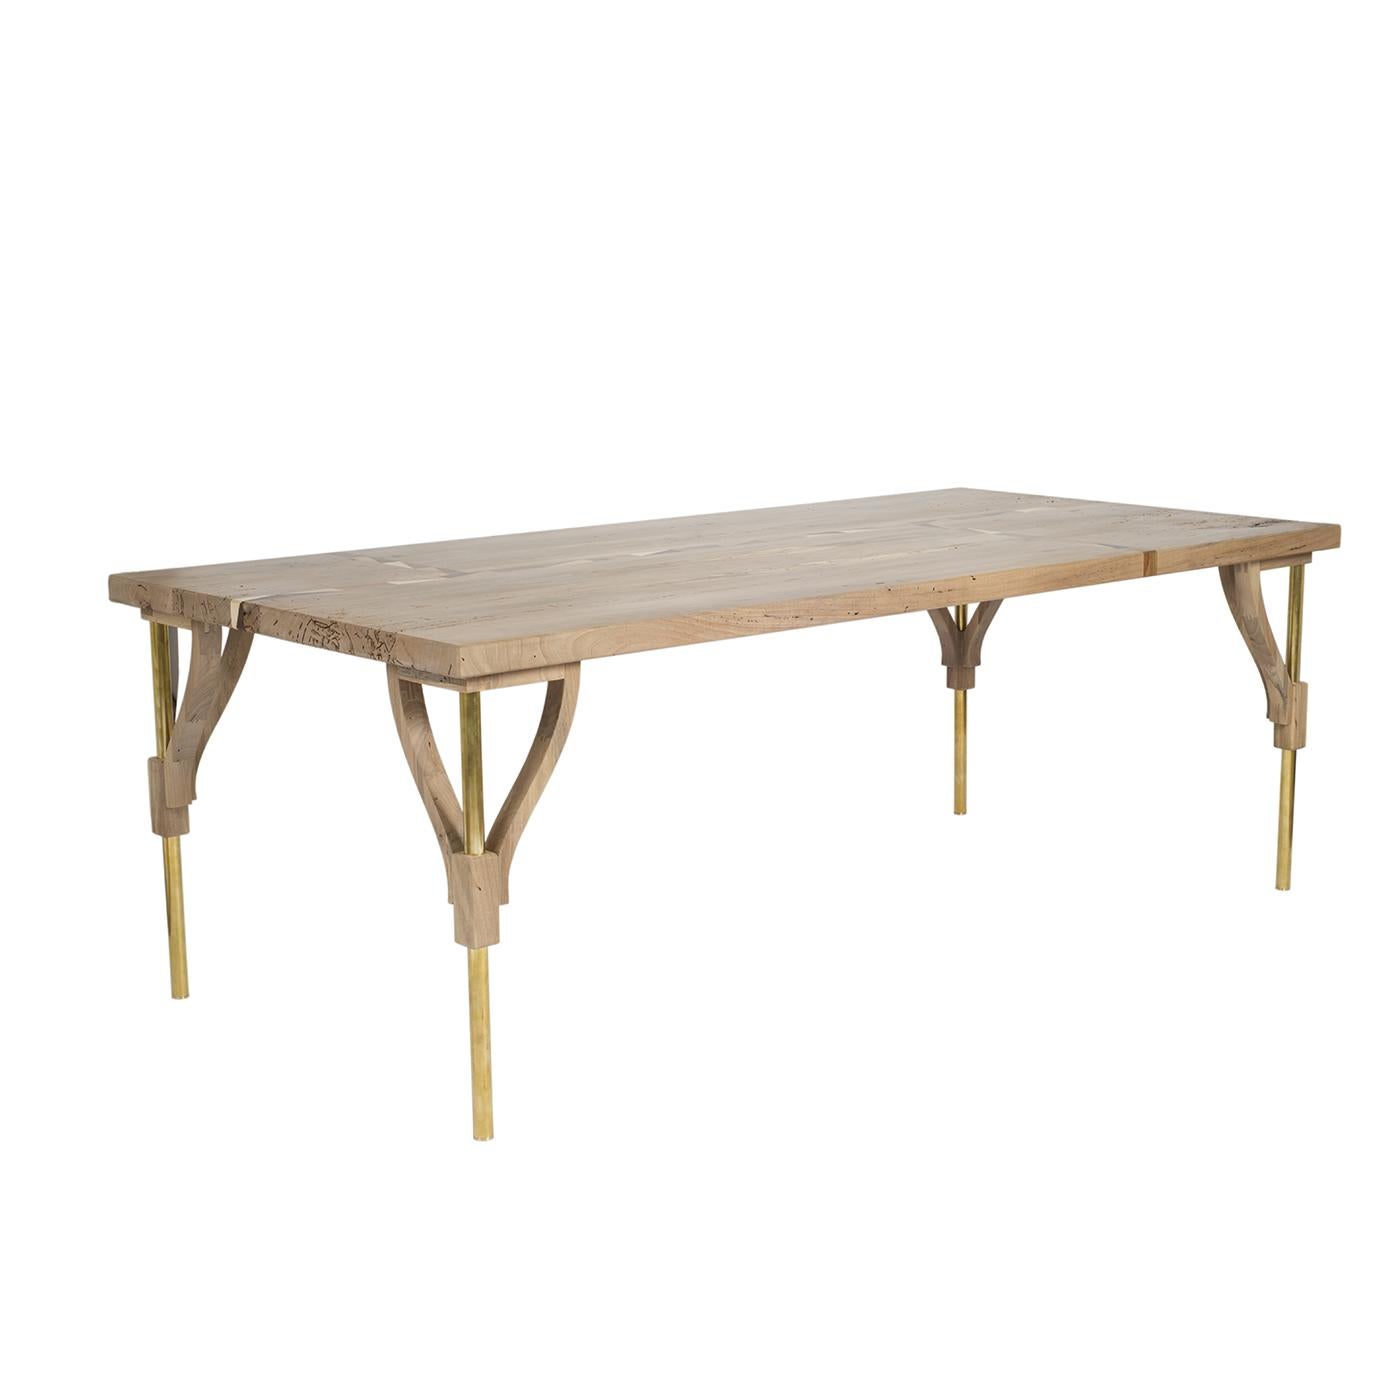 Meticulously crafted with by expert craftsmen, this table is a sublime accent in a contemporary and rustic interior. The rectangular top is entirely fashioned of solid walnut wood complete with 10mm wide inlays. The slender brass legs are embedded